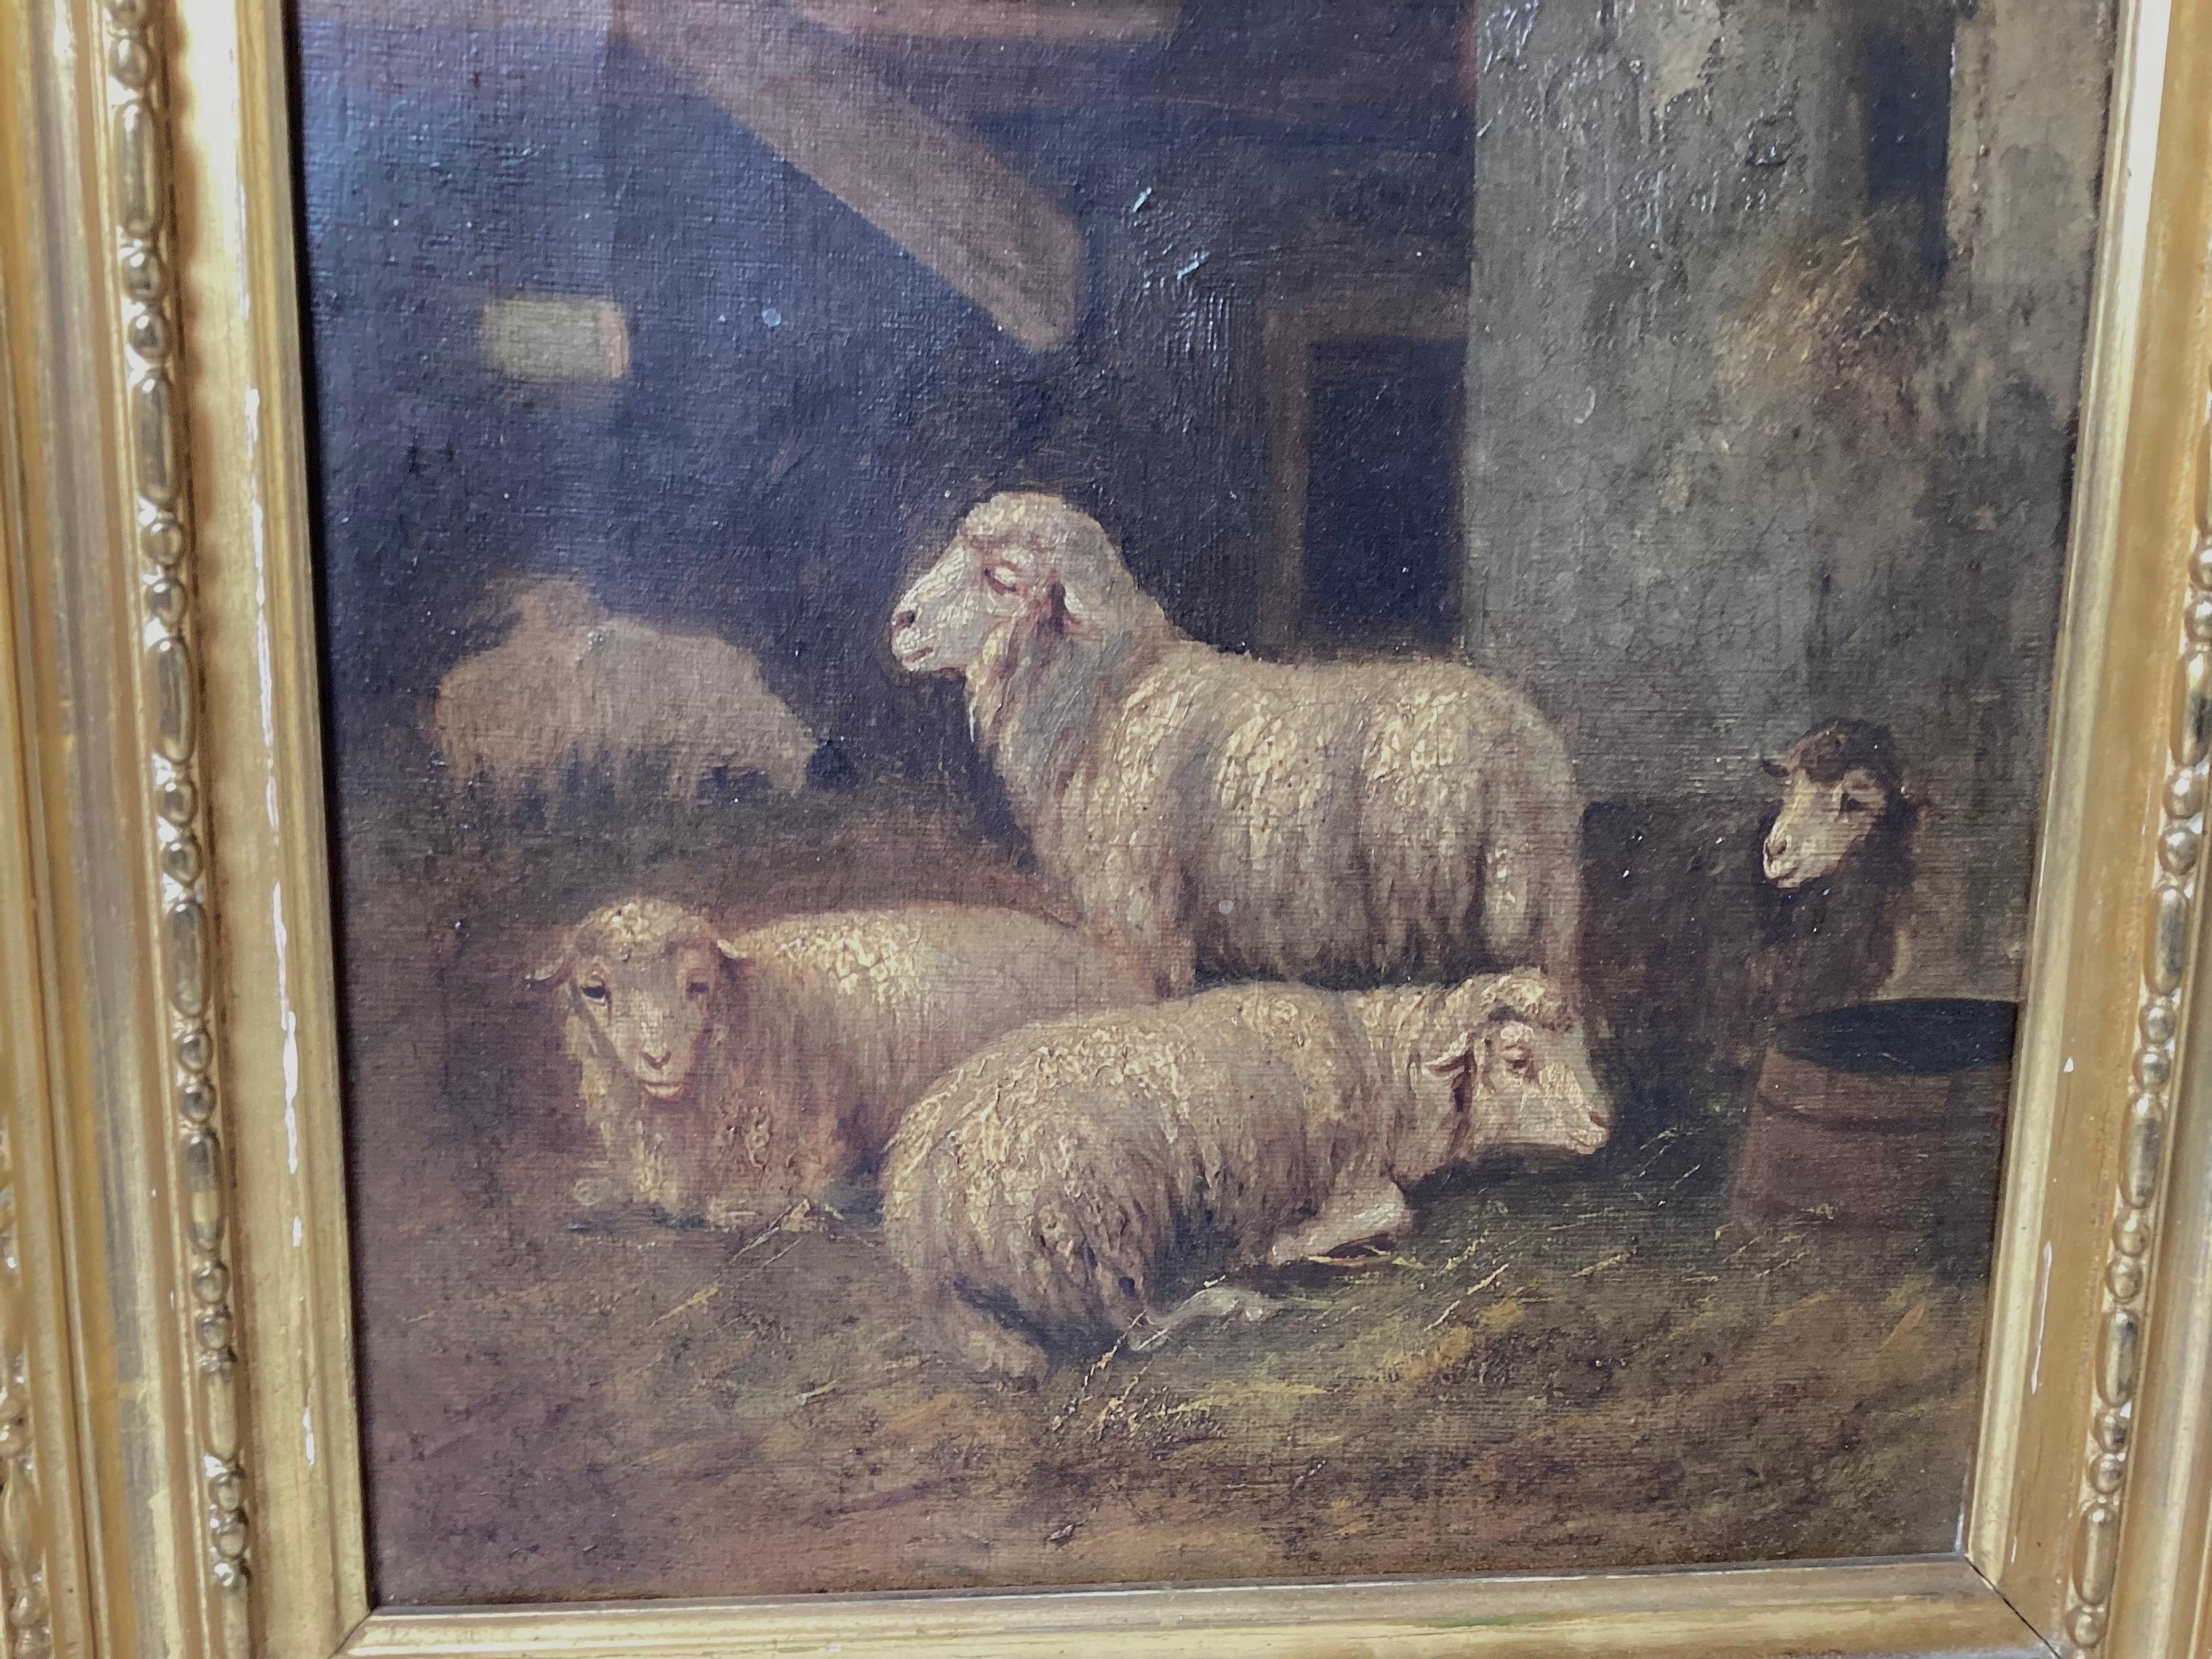 A European Continental School oil on canvas in elaborate original gilt and gesso frame. The painting depicts sheep in their barn in a calming and serine position. The elegant original giltwood frame with minor discoloration to the gold surface